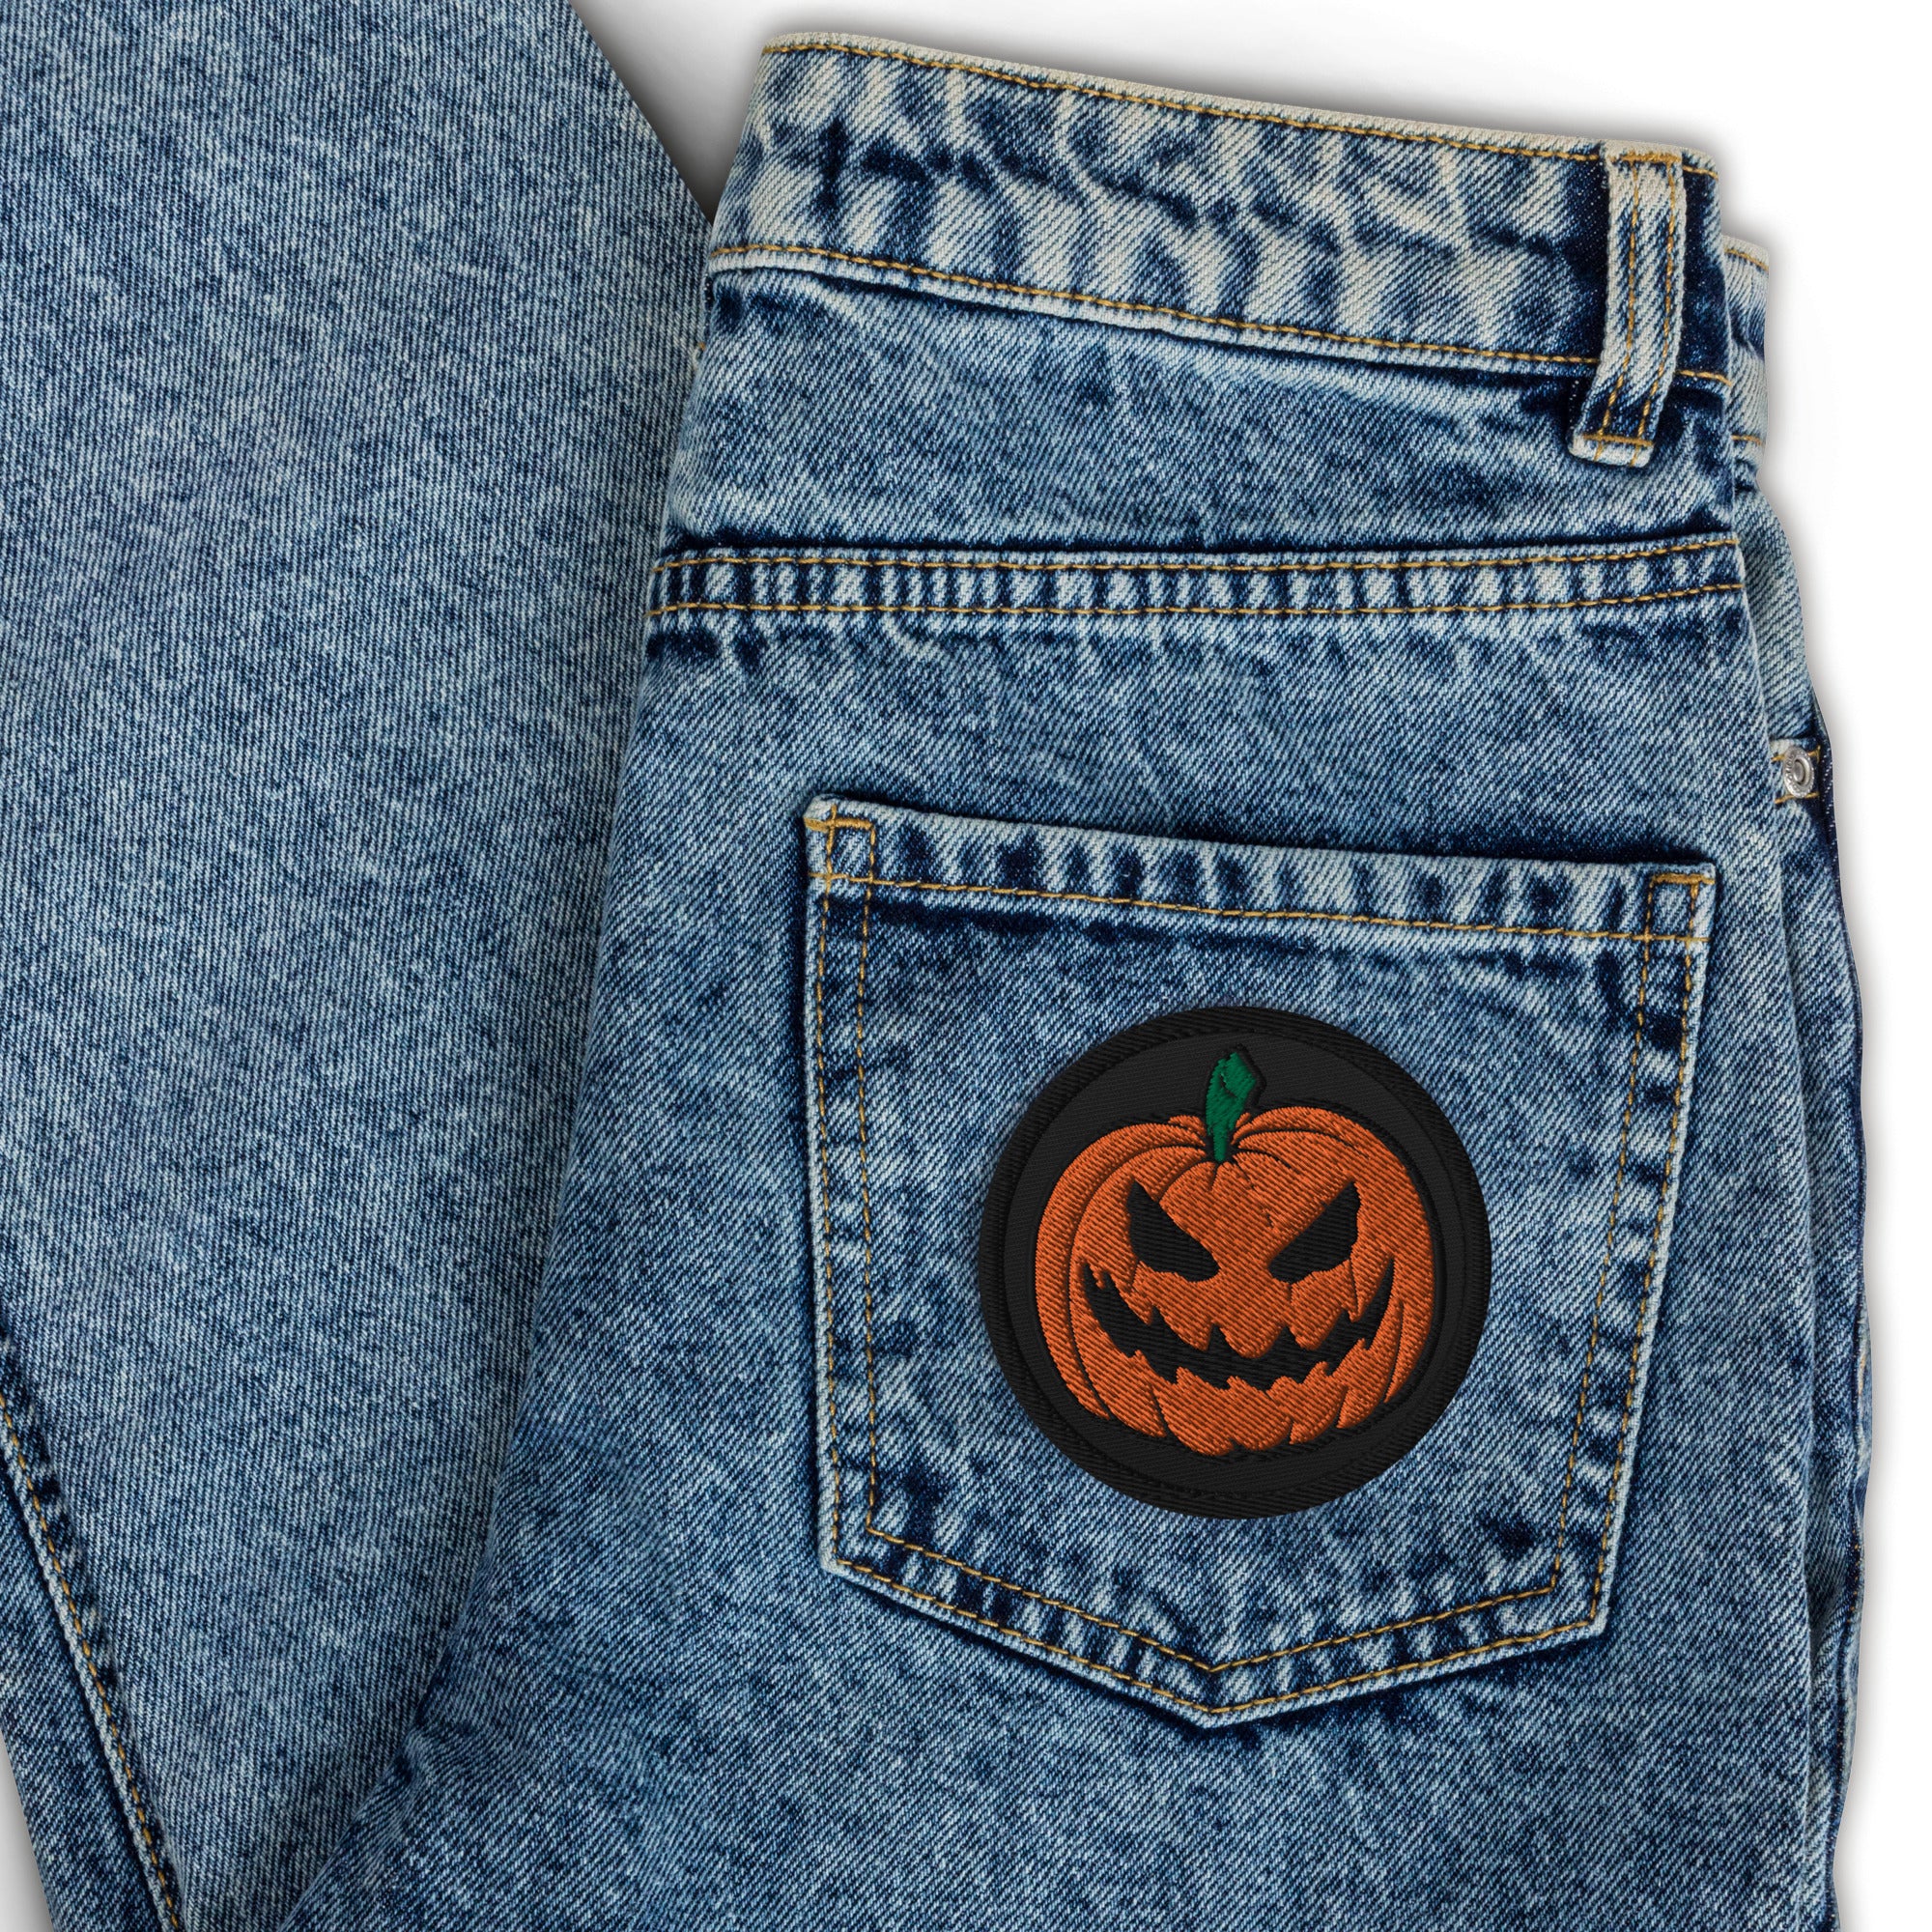 Scary Jack O Lantern Halloween Pumpkin Embroidered Patch - Edge of Life Designs